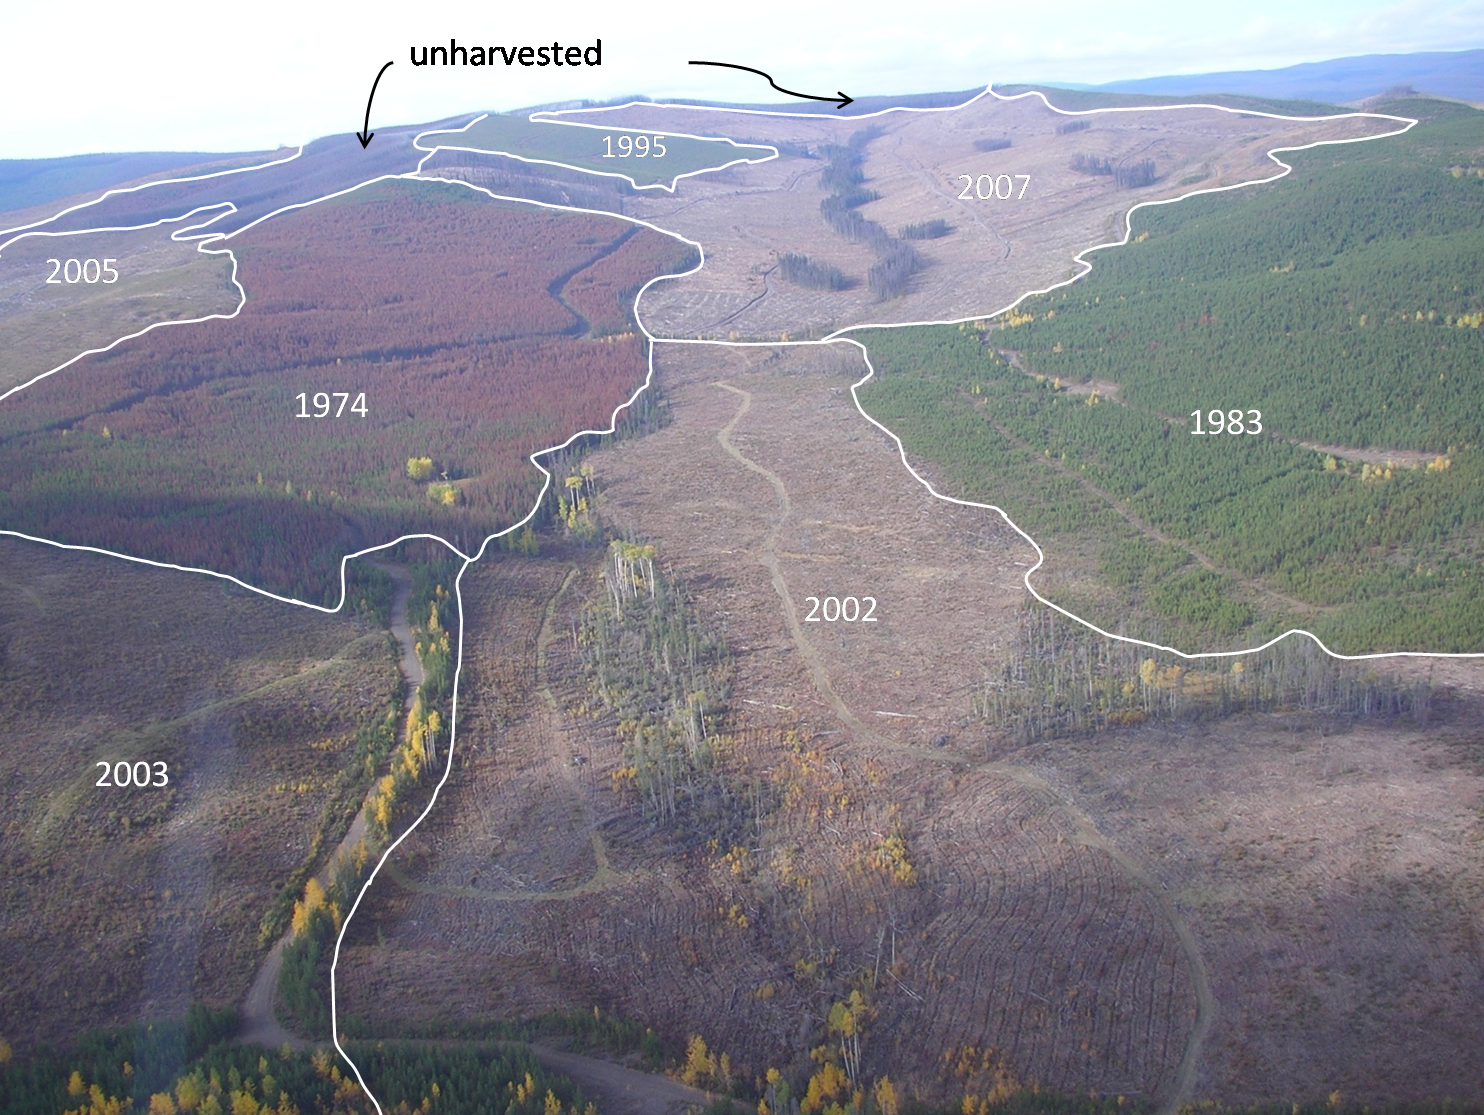 A picture of a 600-hectare portion of forest, included in a 2009 report, is marked up to show dates of harvest. Illustration provided by the B.C. Forest Practices Board